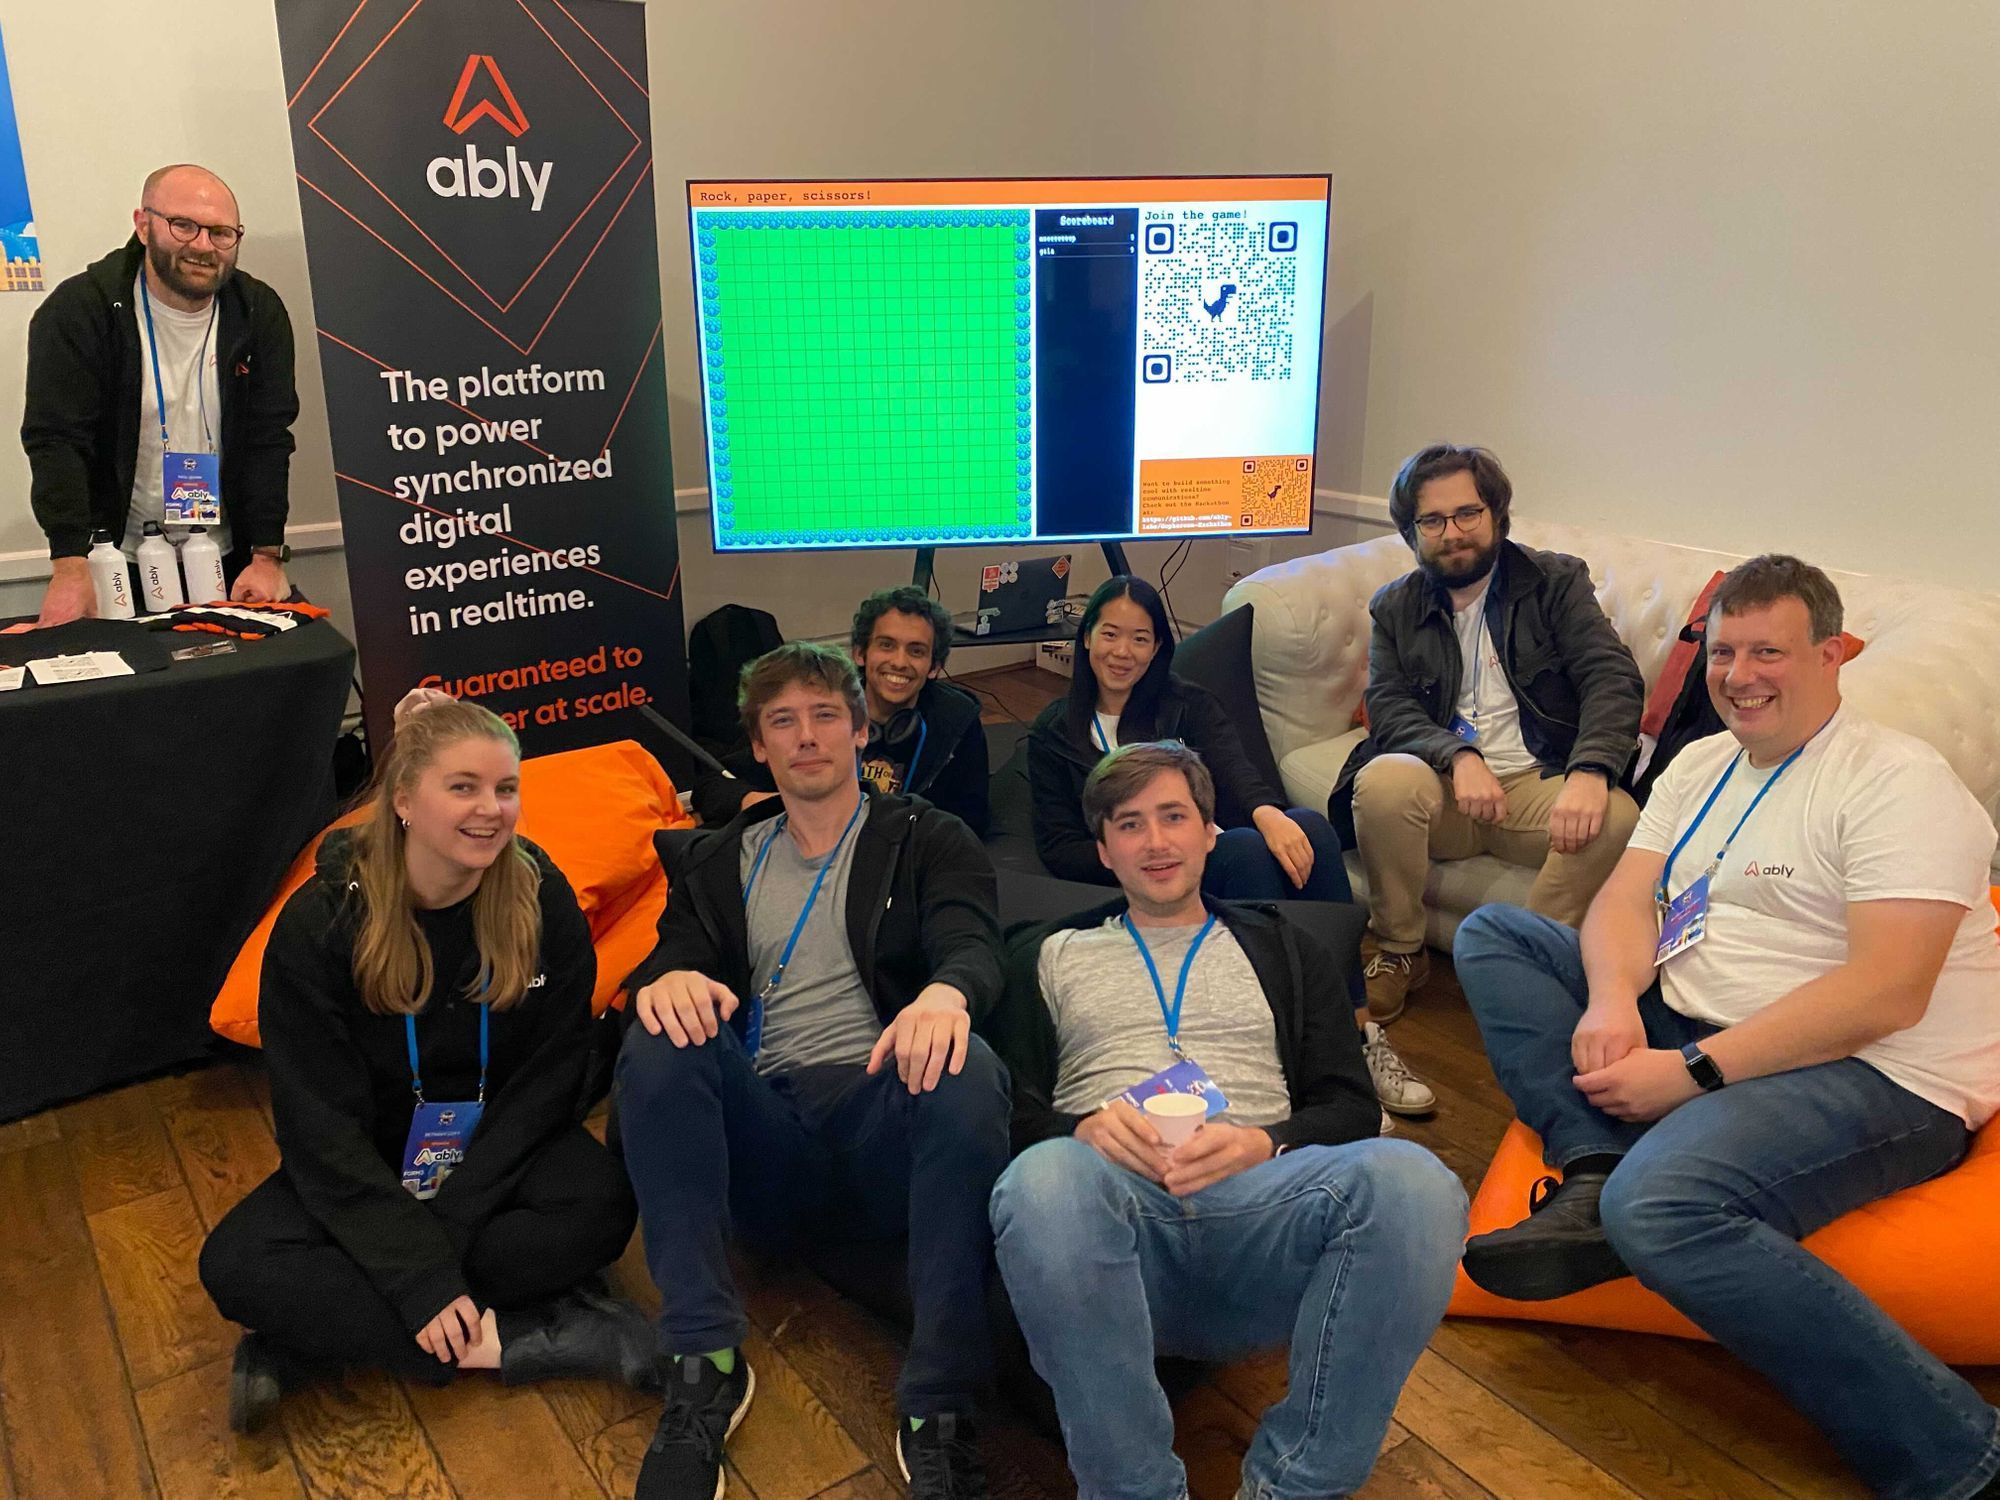 The Ably team sat on bean bags with an Ably banner in the background.